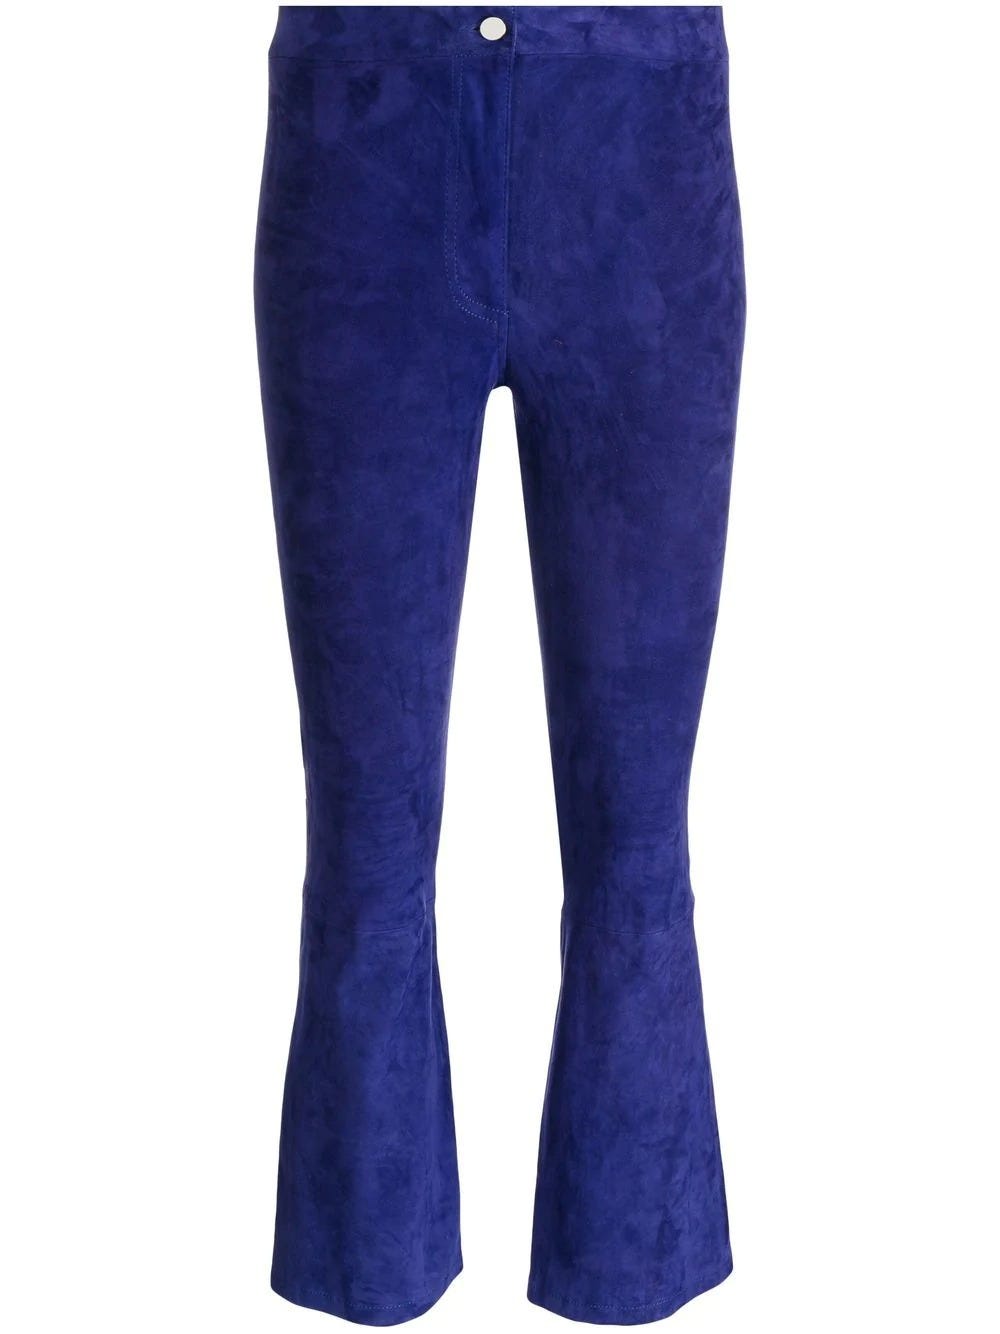 ARMA BLUE HIGH-WAISTED CROP PANTS IN SUEDE